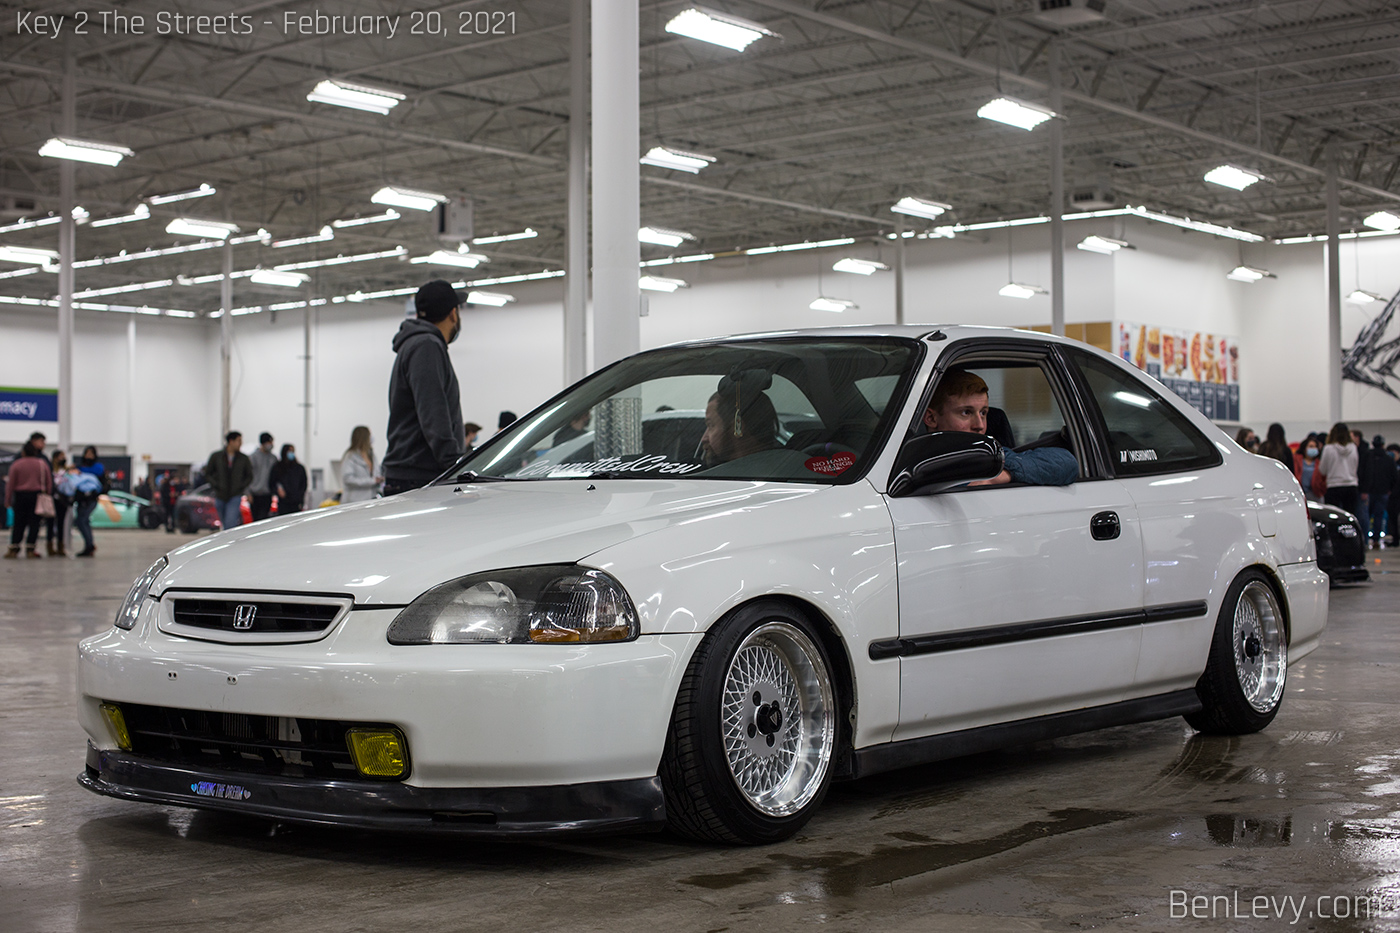 White Honda Civic with Committed Crew sticker